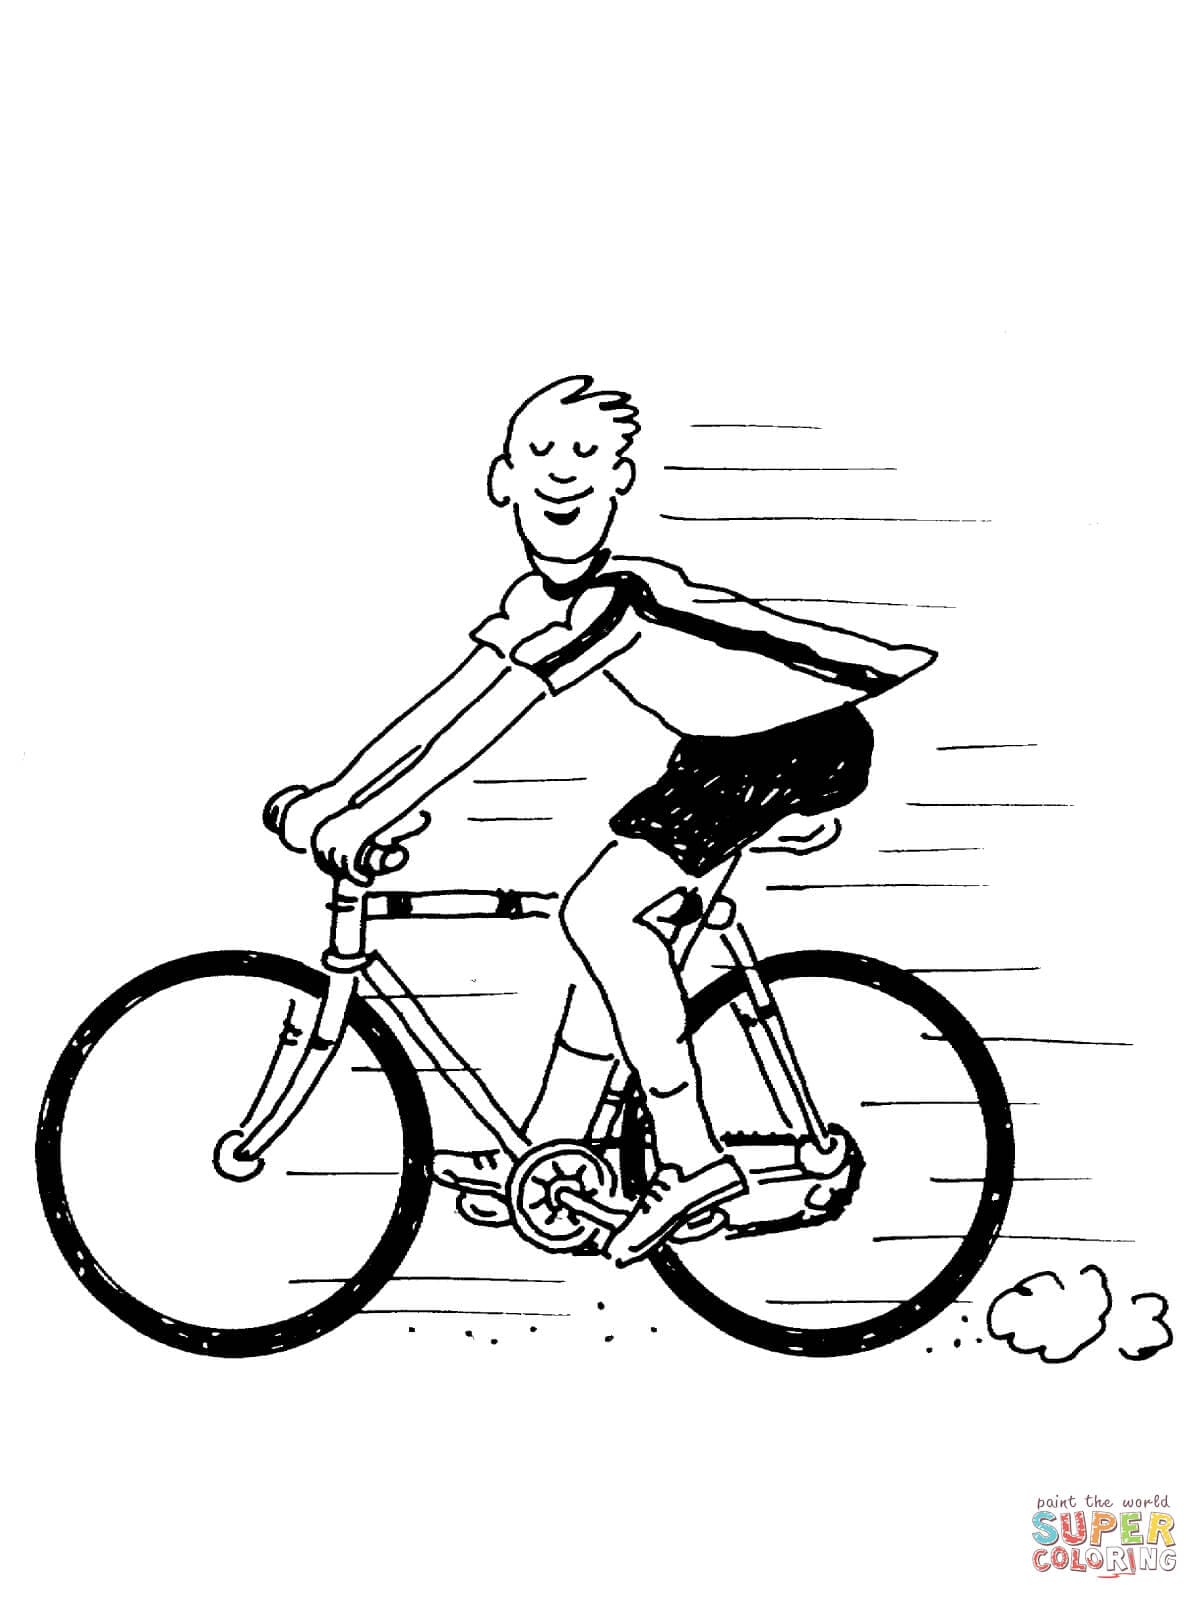 Cycling Image For Kids Coloring Page